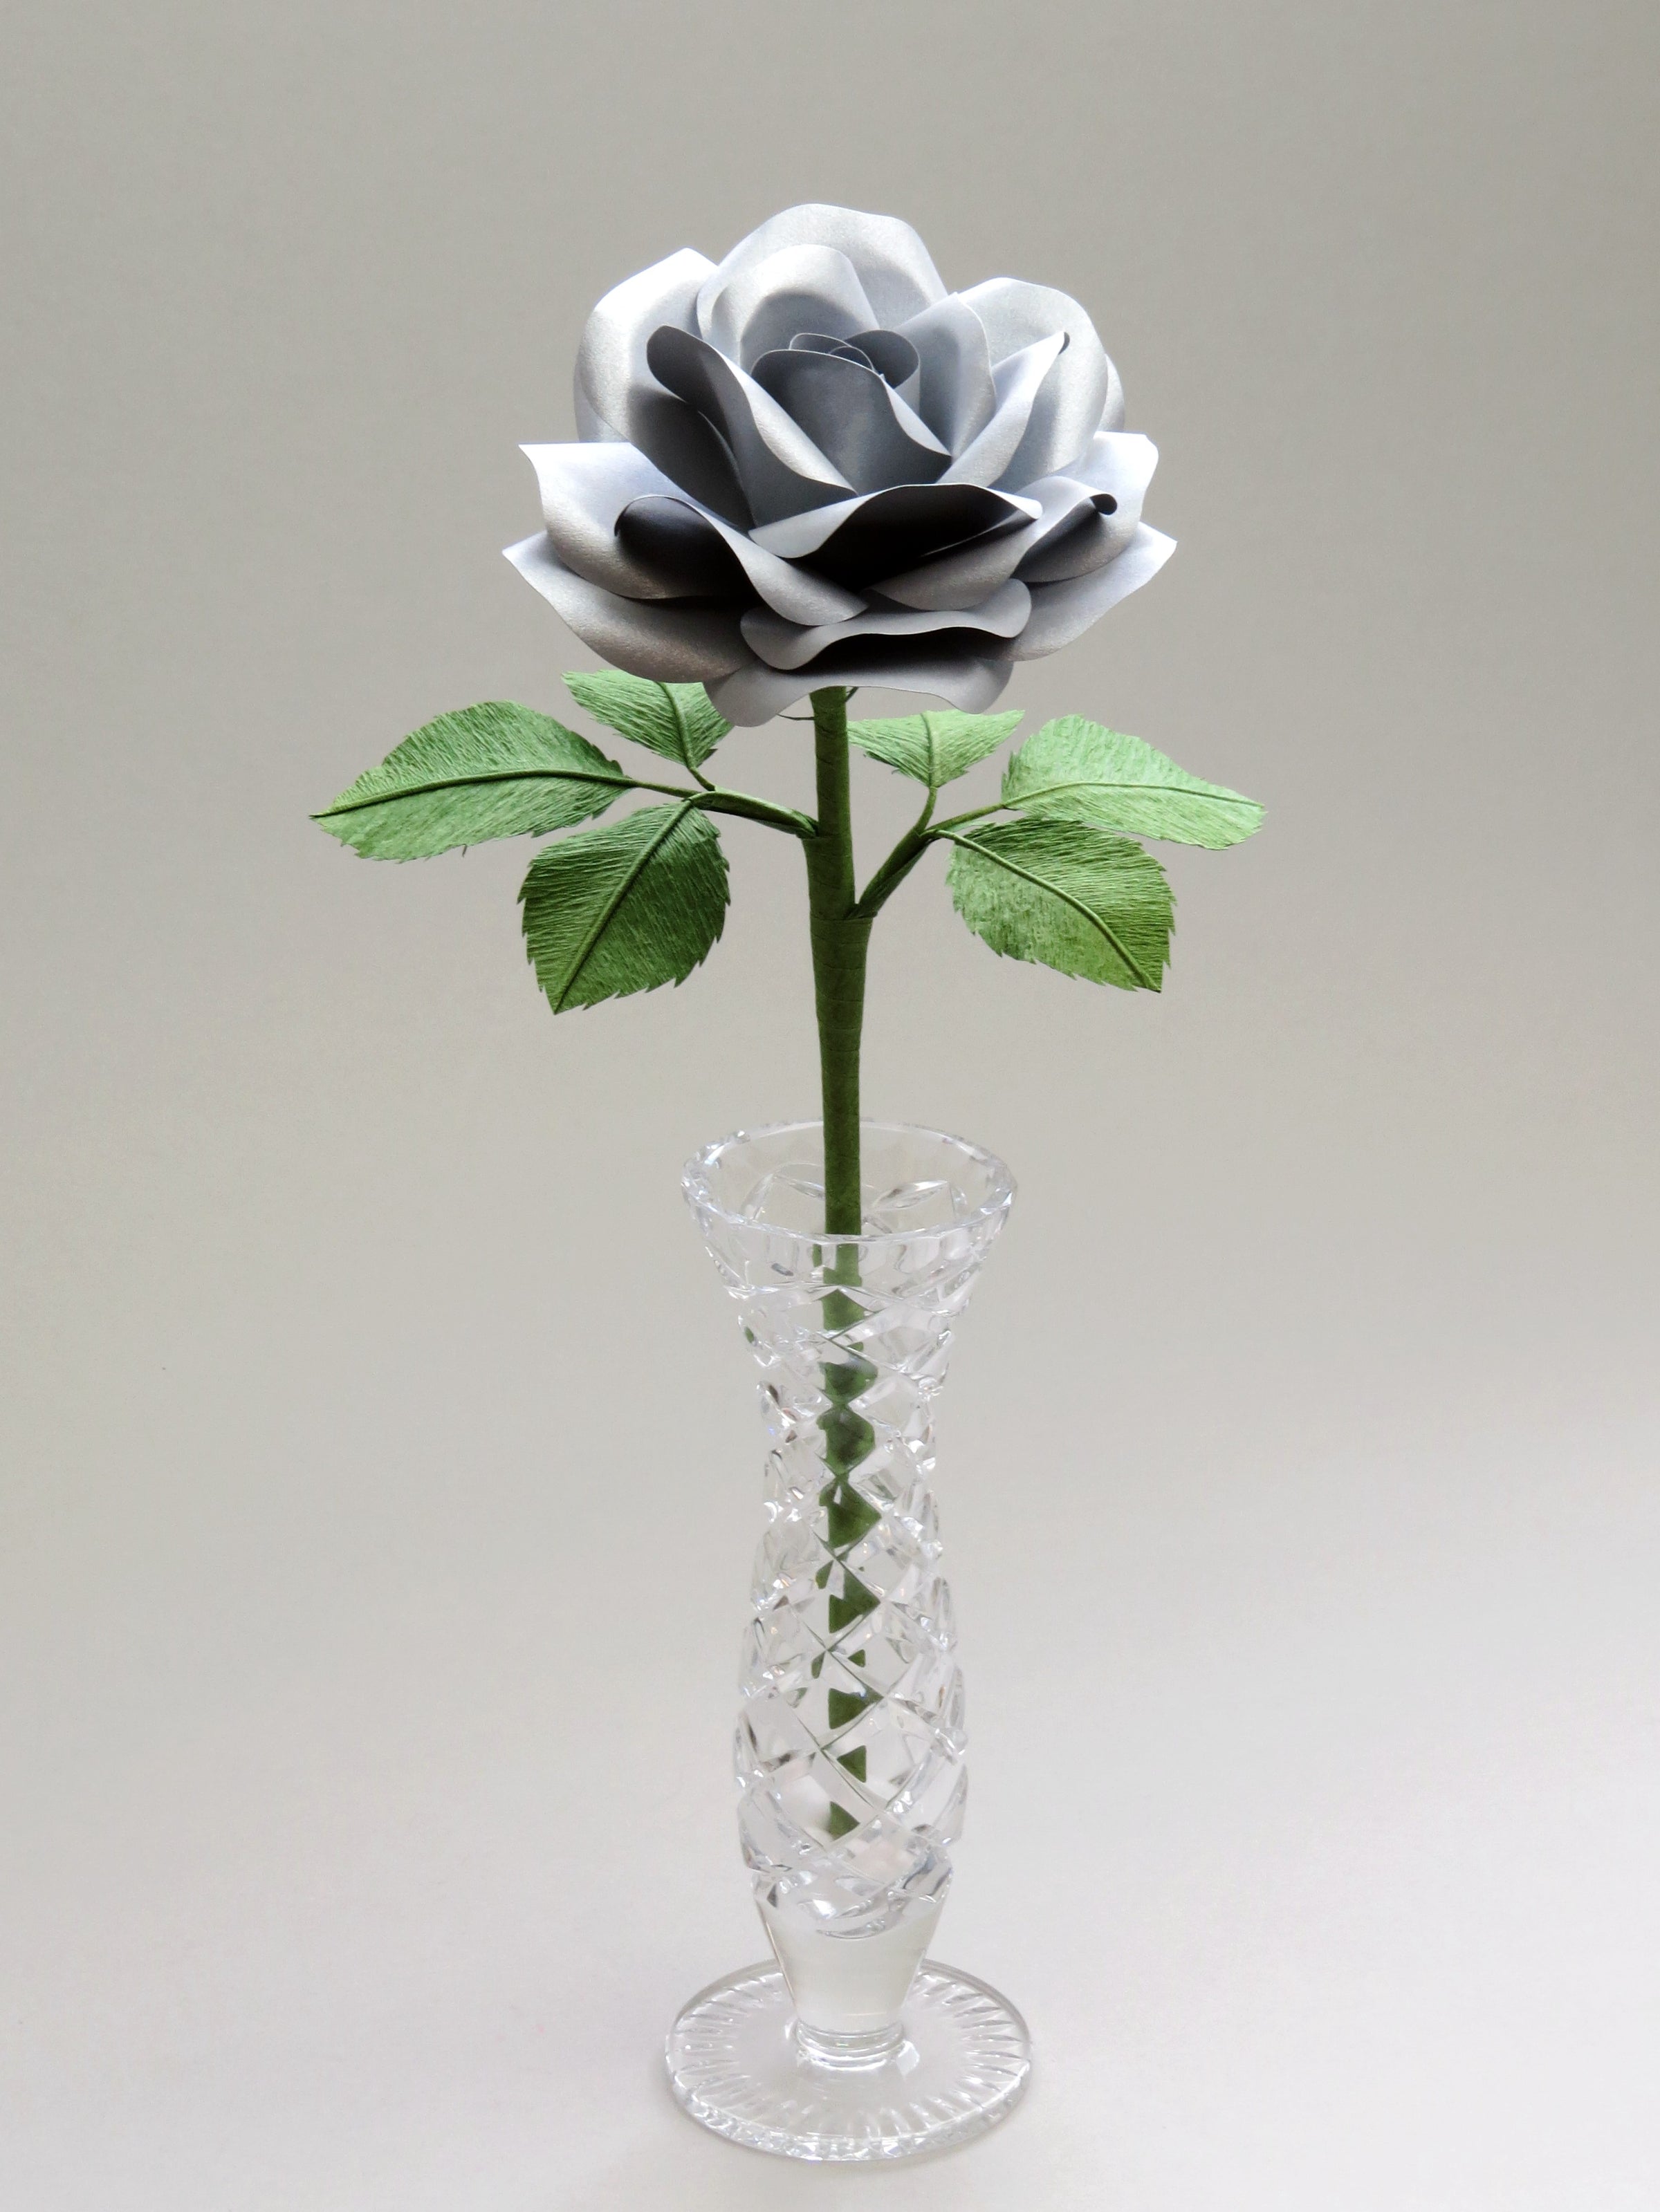 Steel paper rose with six ivy green crepe paper leaves standing in a narrow glass vase set against a light grey background